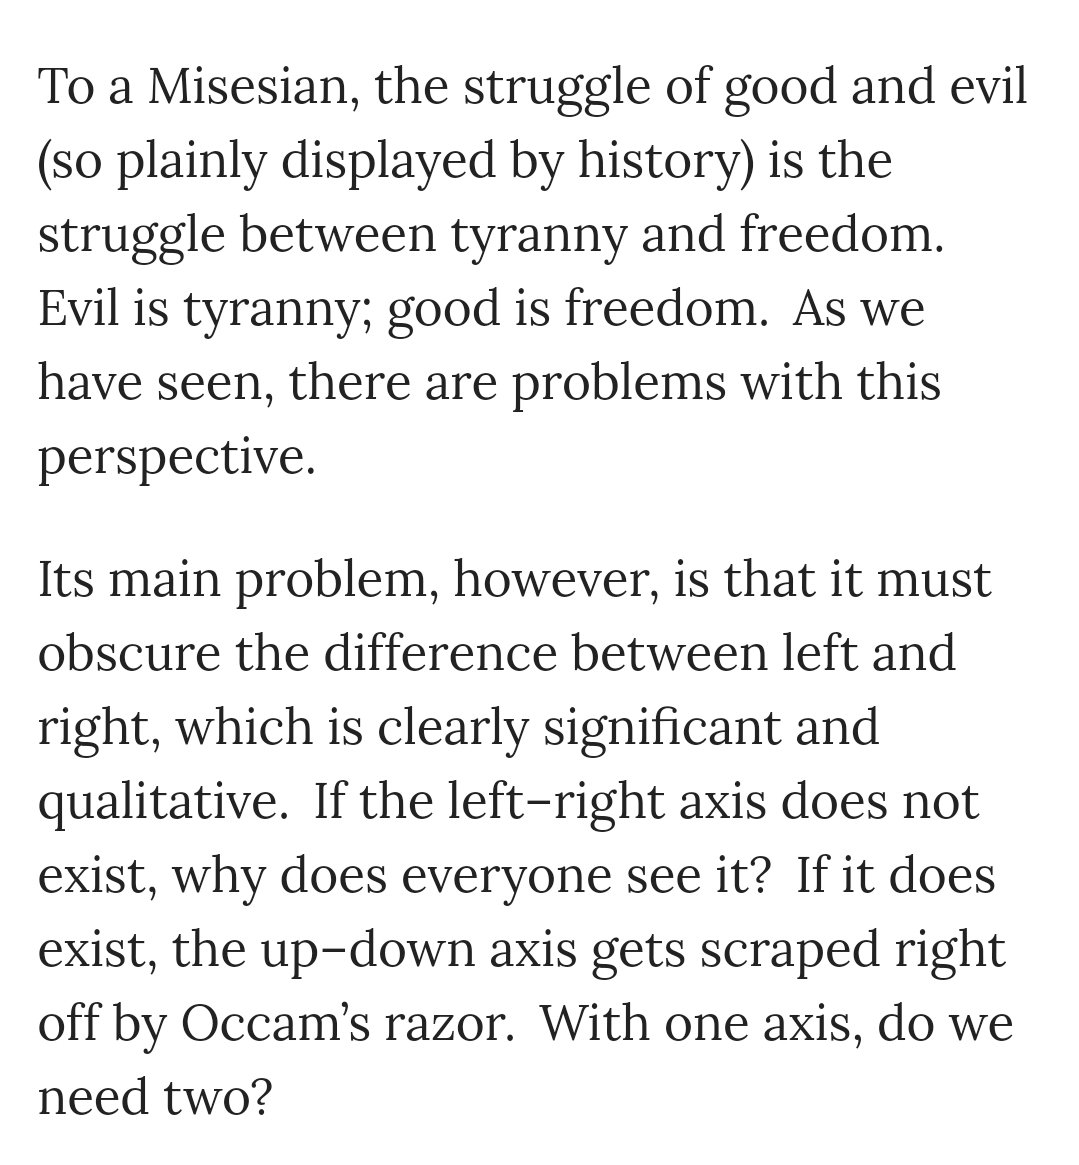 For example, Yarvin critiques the idea of politics as "tyranny v freedom" and I think he raises valid points. But to Mises, freedom wasn't some abstract concept of "liberty", it was the preservation of social order under a system of property rights.